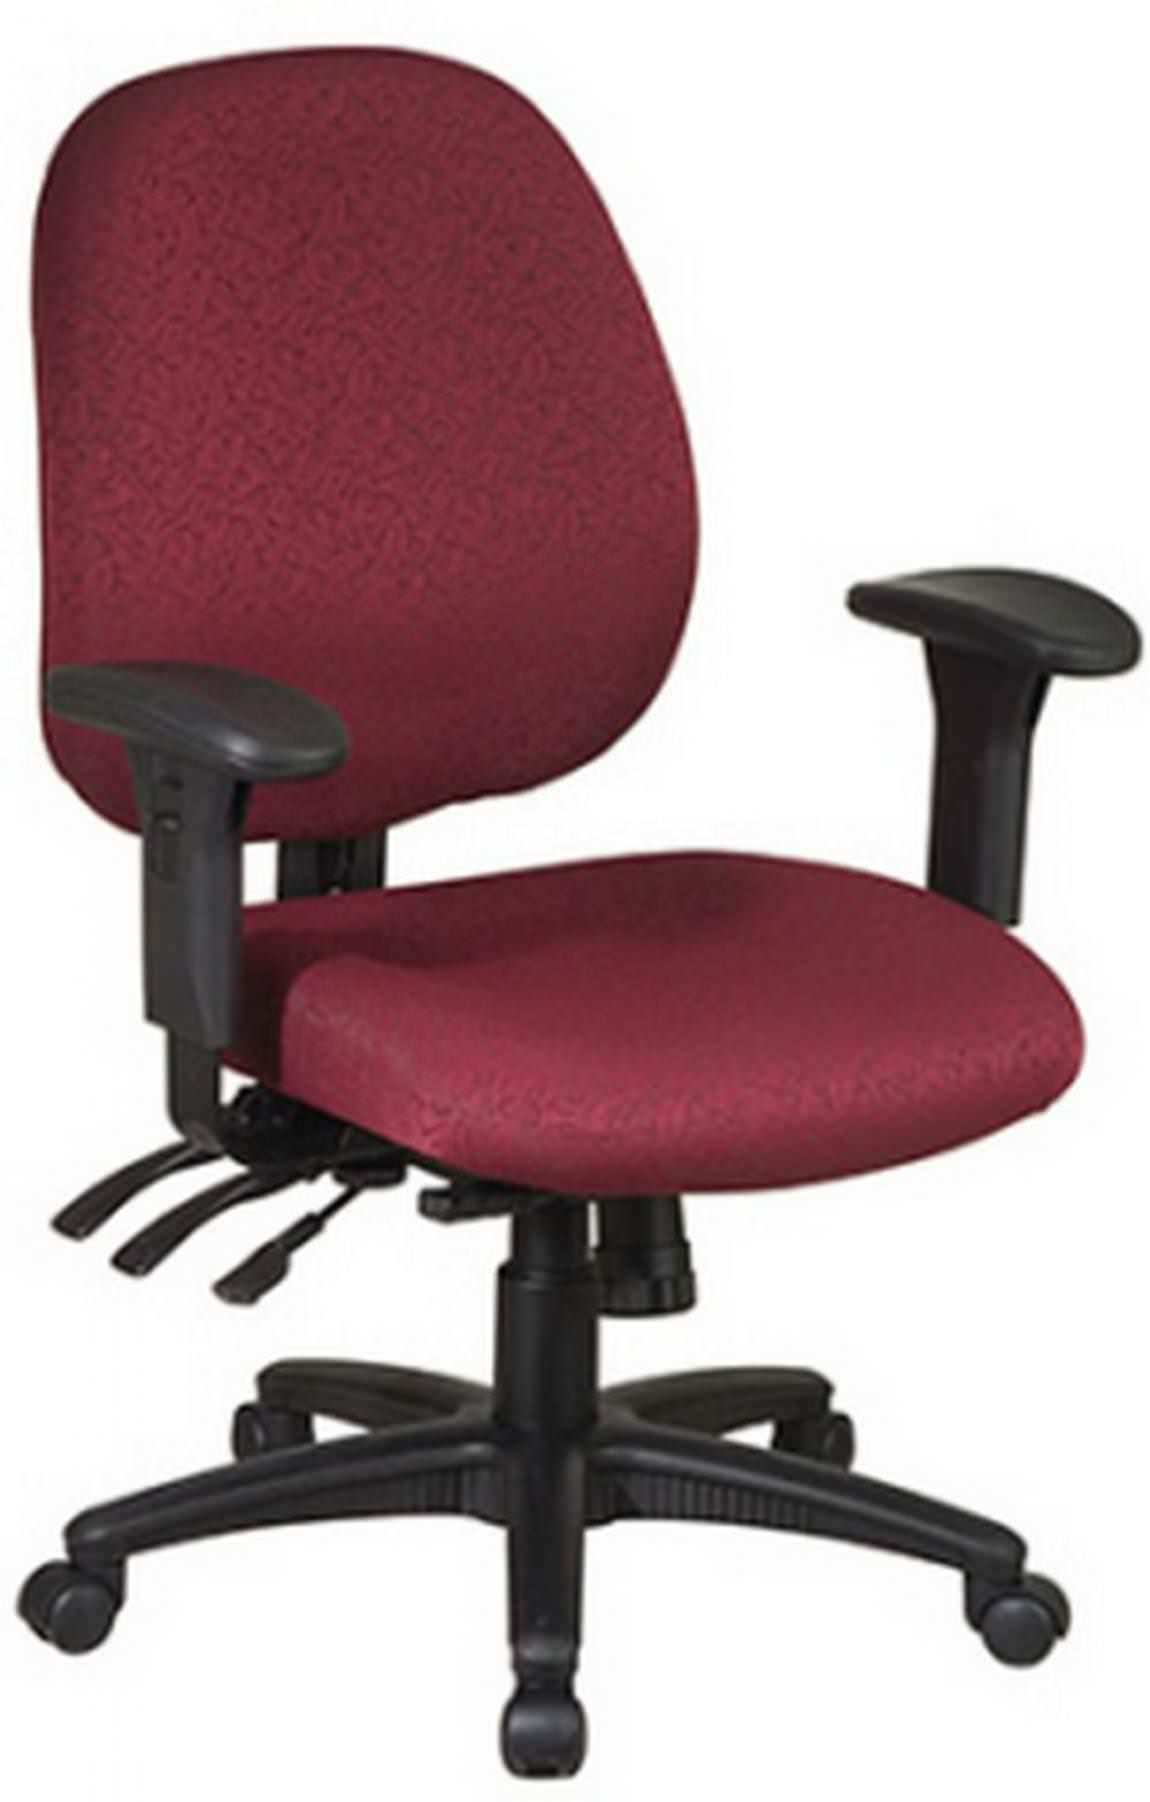 Highly Adjustable Rolling Office Chair